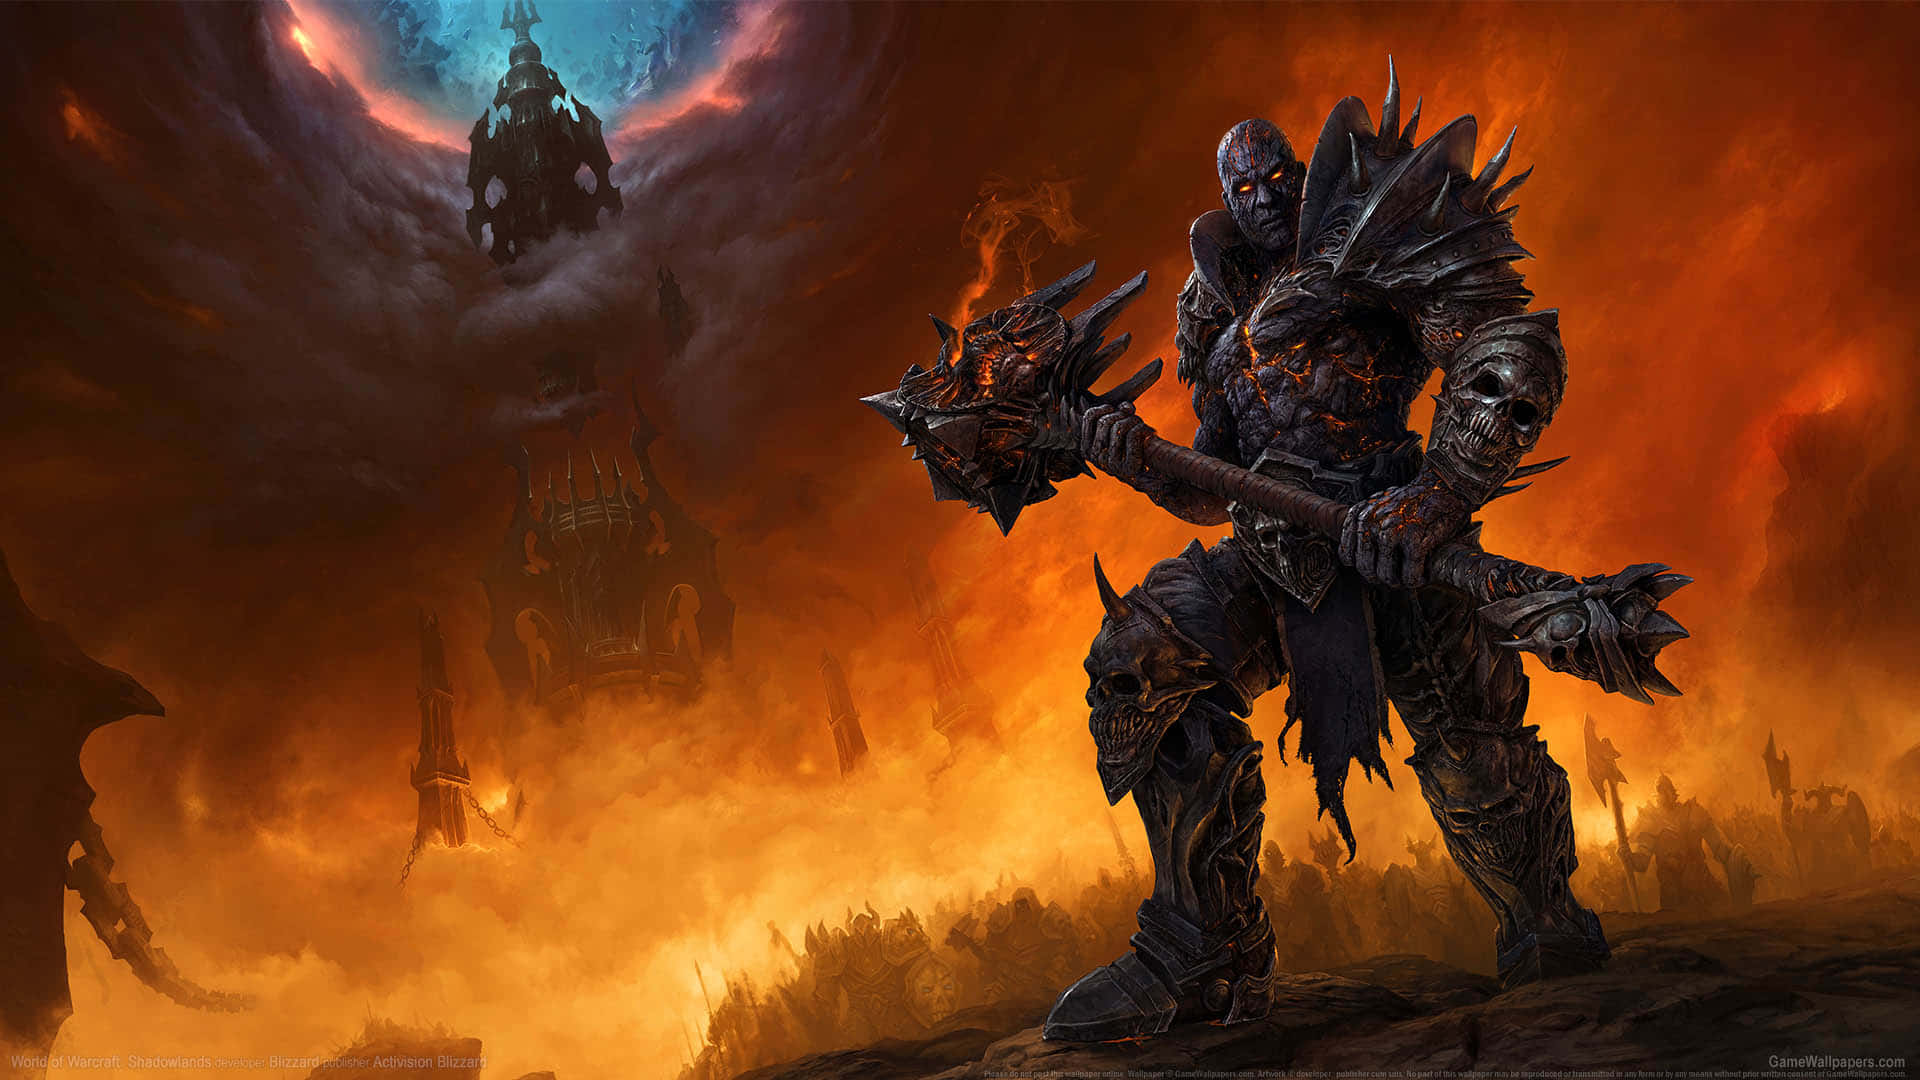 Submerge into the fantasy world of Warcraft Wallpaper